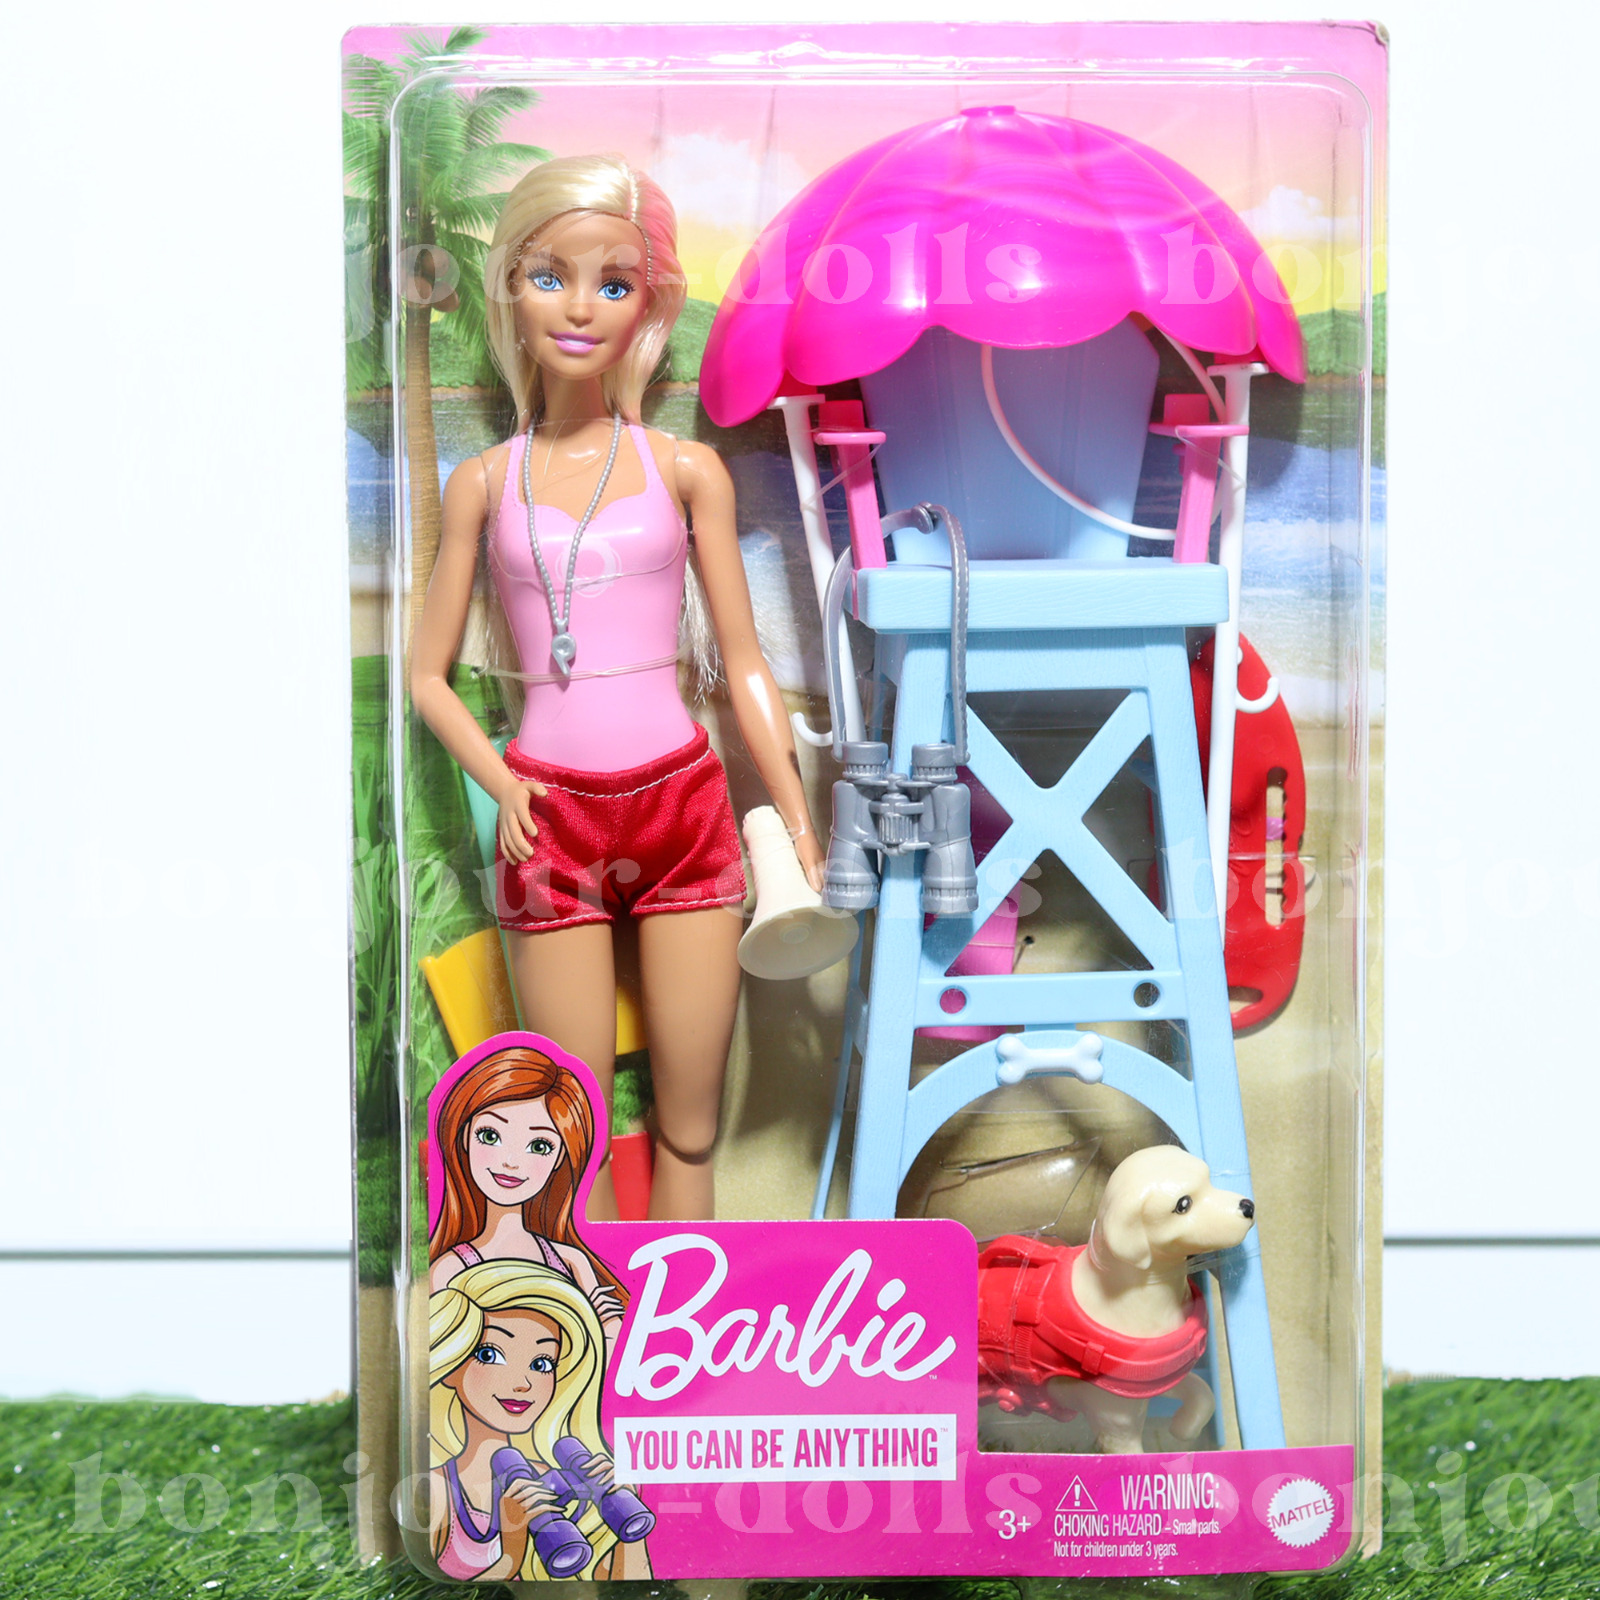 Barbie You Can Be Anything Lifeguard Playset - GTX69